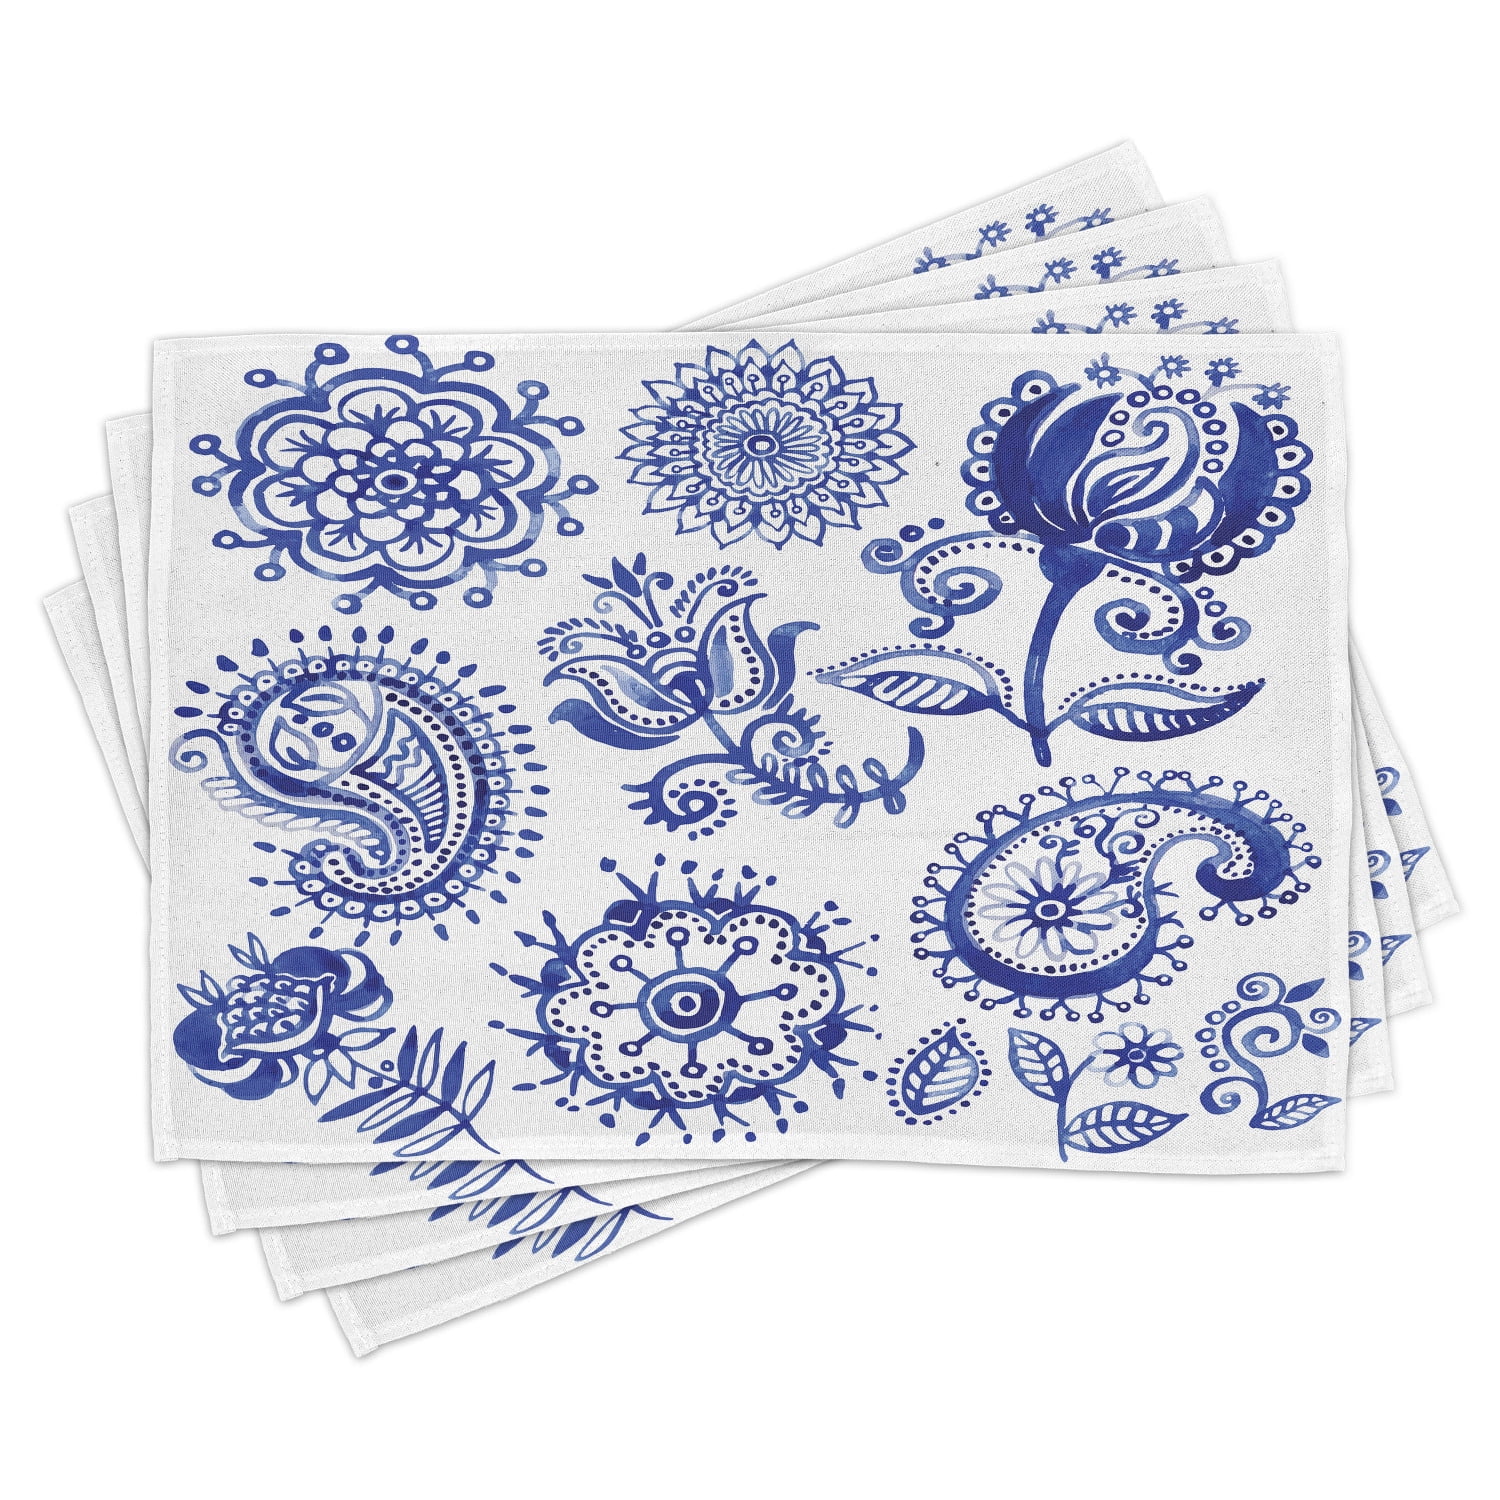 Ambesonne Floral Place Mats Set of 4 Vintage Art with Ornaments and Paisley Elements Oriental Artwork Charcoal Grey and White Washable Fabric Placemats for Dining Room Kitchen Table Decor